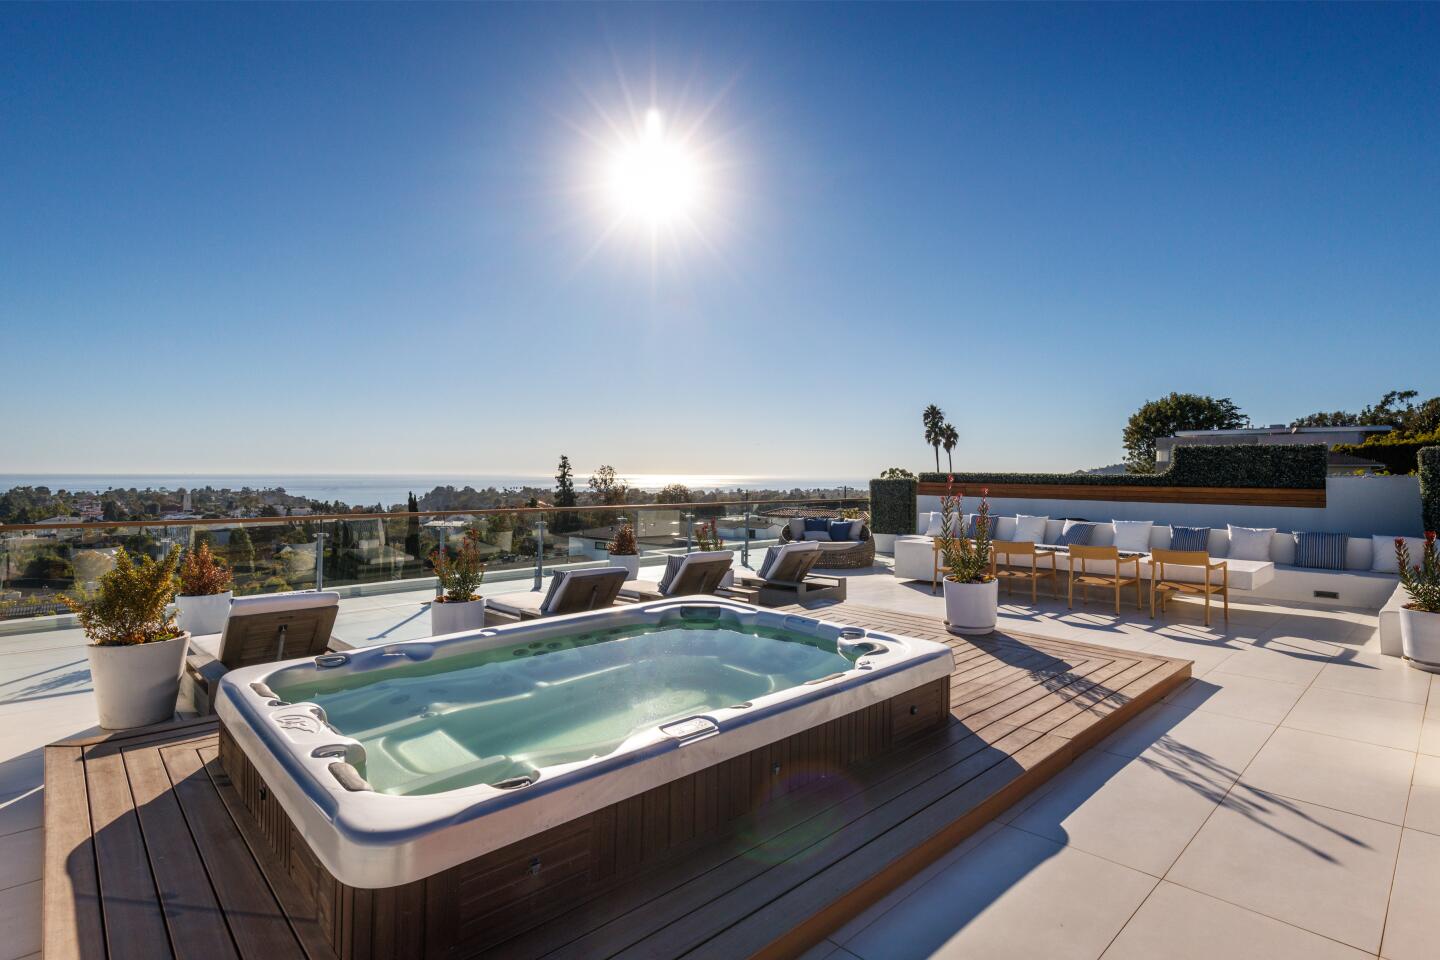 A rooftop deck with a hot tub